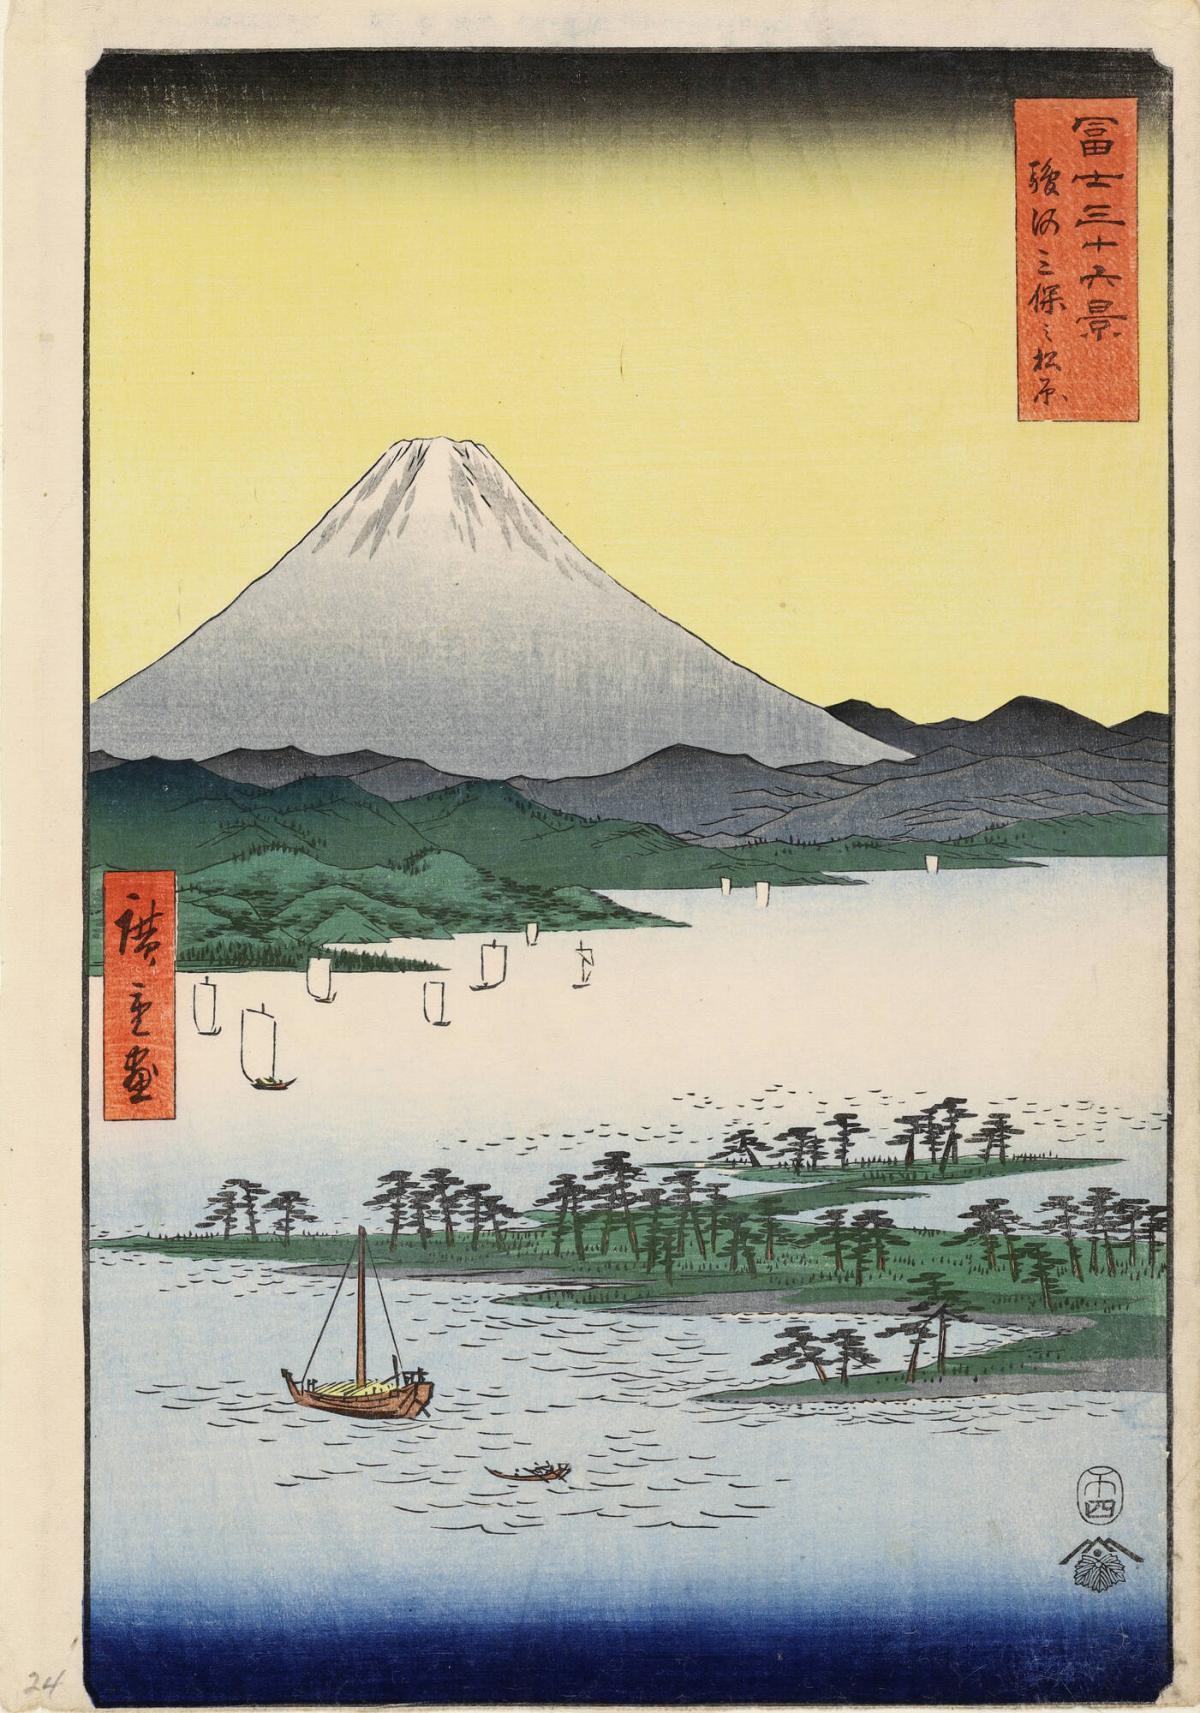 The Pine Forest of Mio in Suruga Province, no. 24 from the series Thirty-six Views of Mt. Fuji